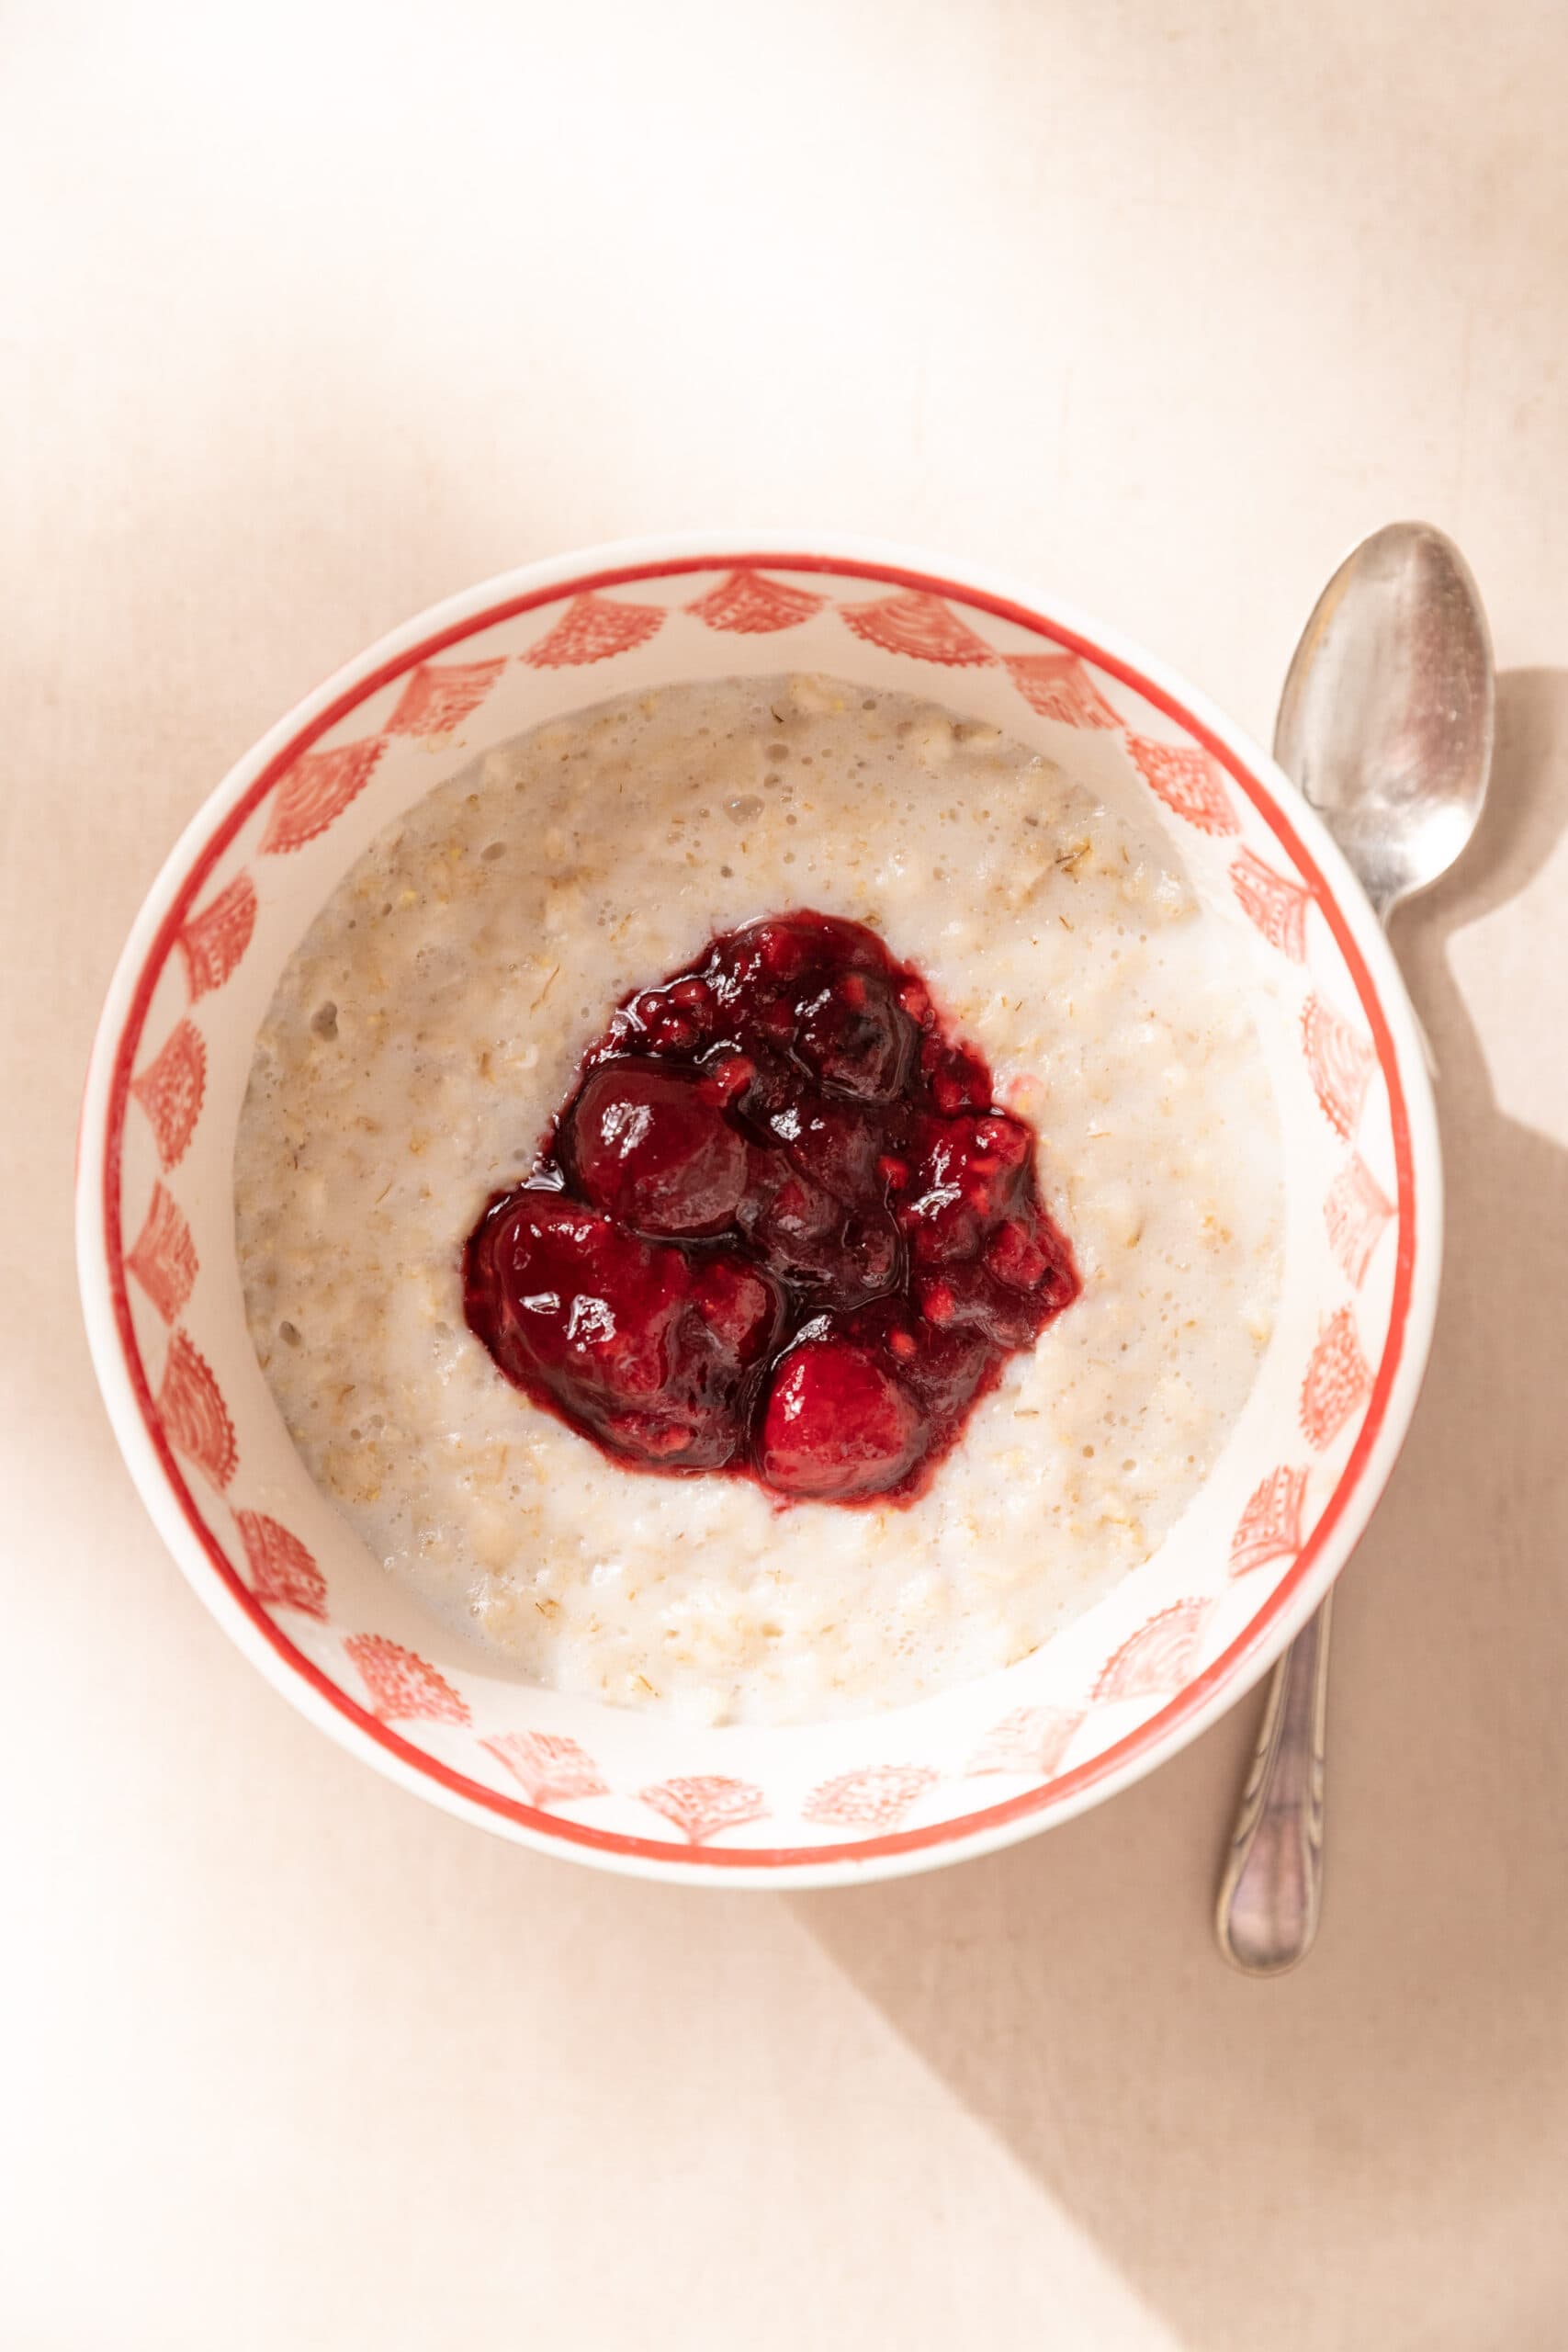 Bowl of oatmeal with berry compote on top.